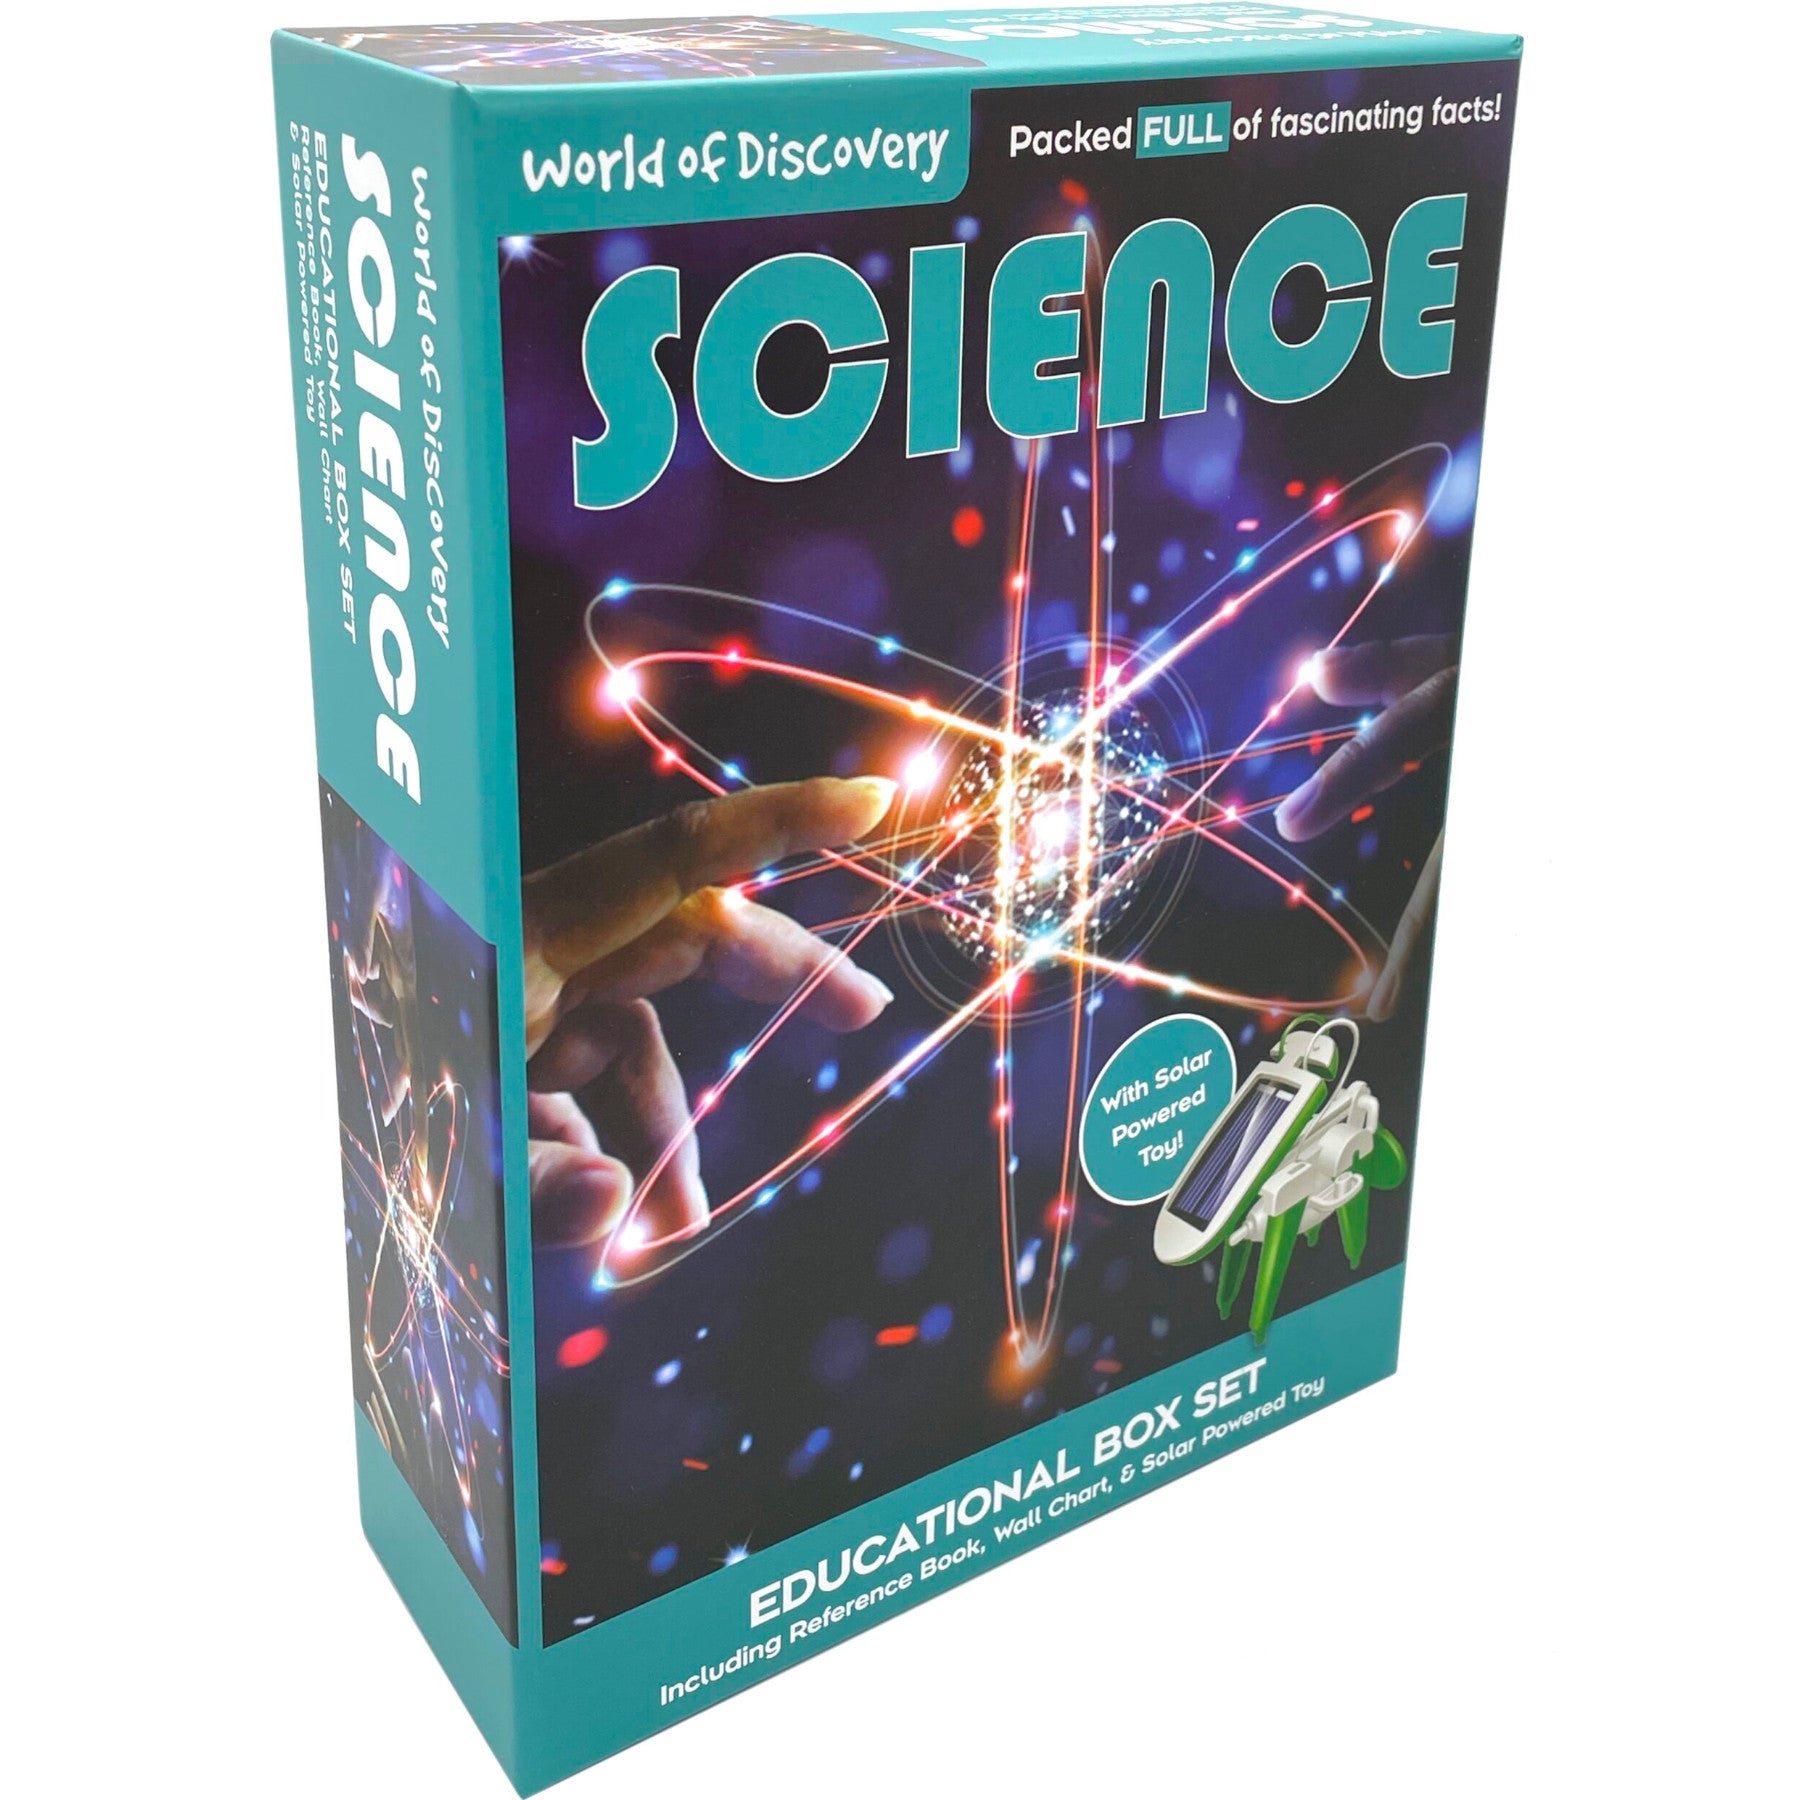 World of Discovery - Discover Science with Solar Powered Toy